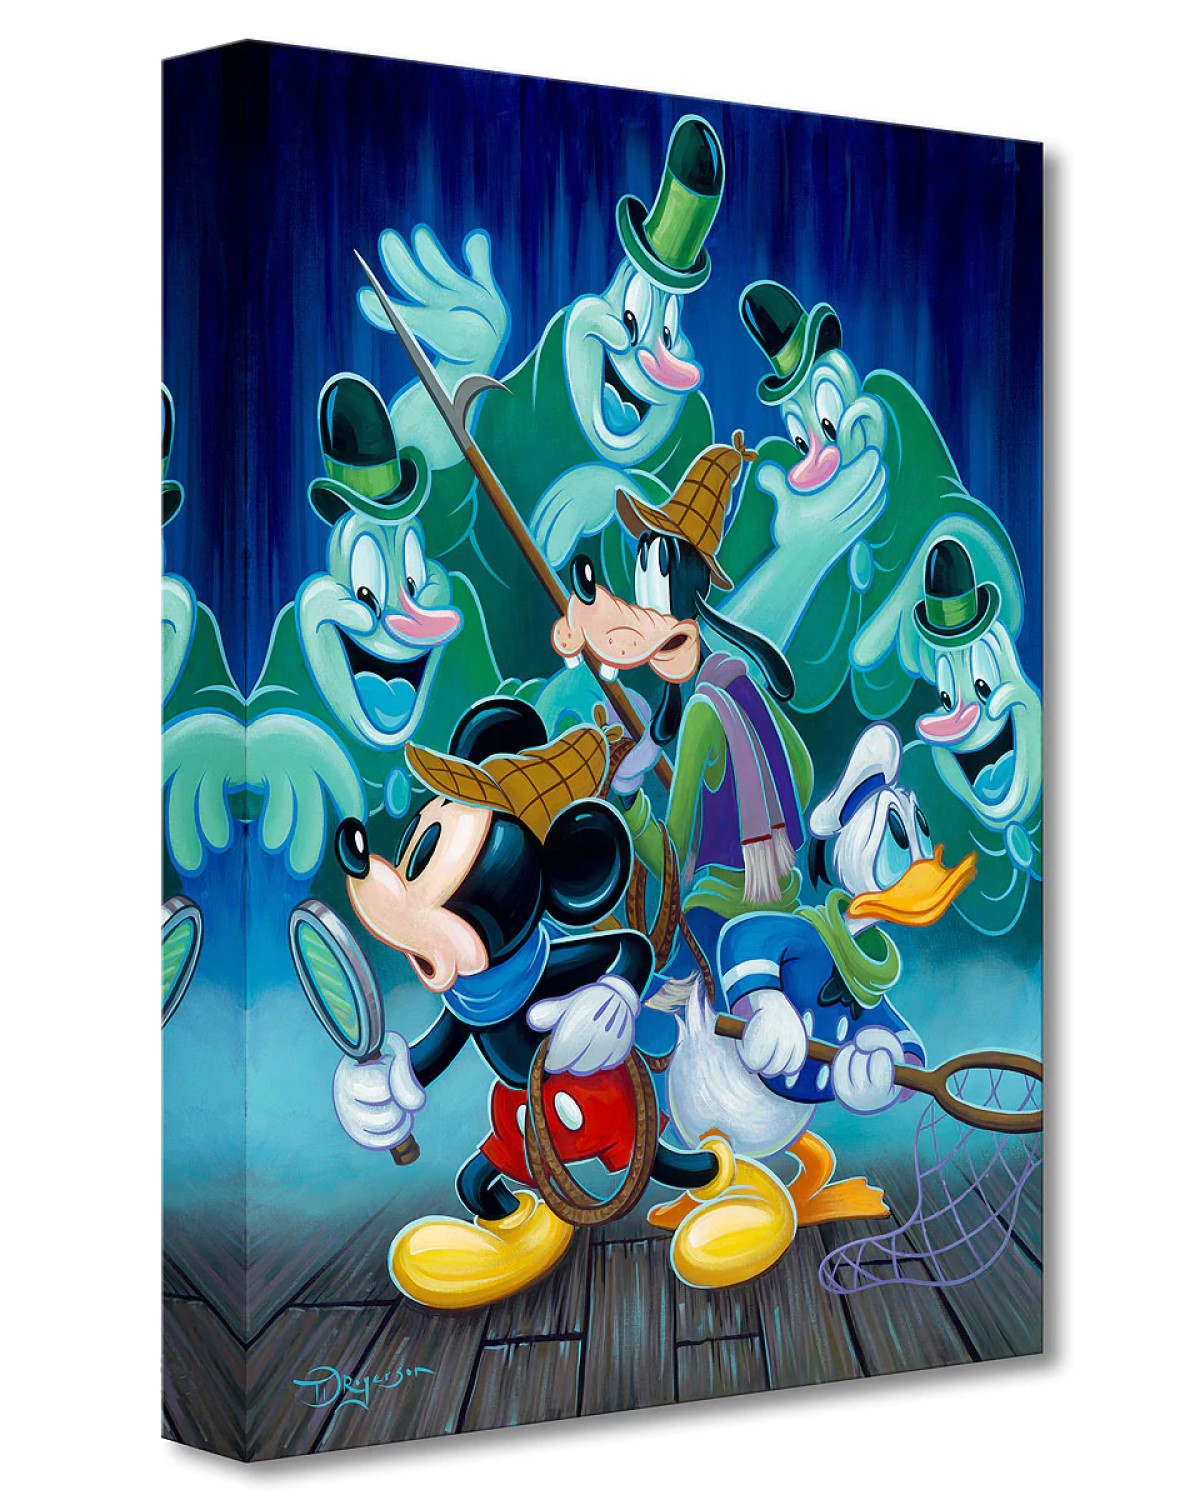 Ghost Chasers by Tim Rogerson featuring Mickey Mouse, Donald Duck, and Goofy